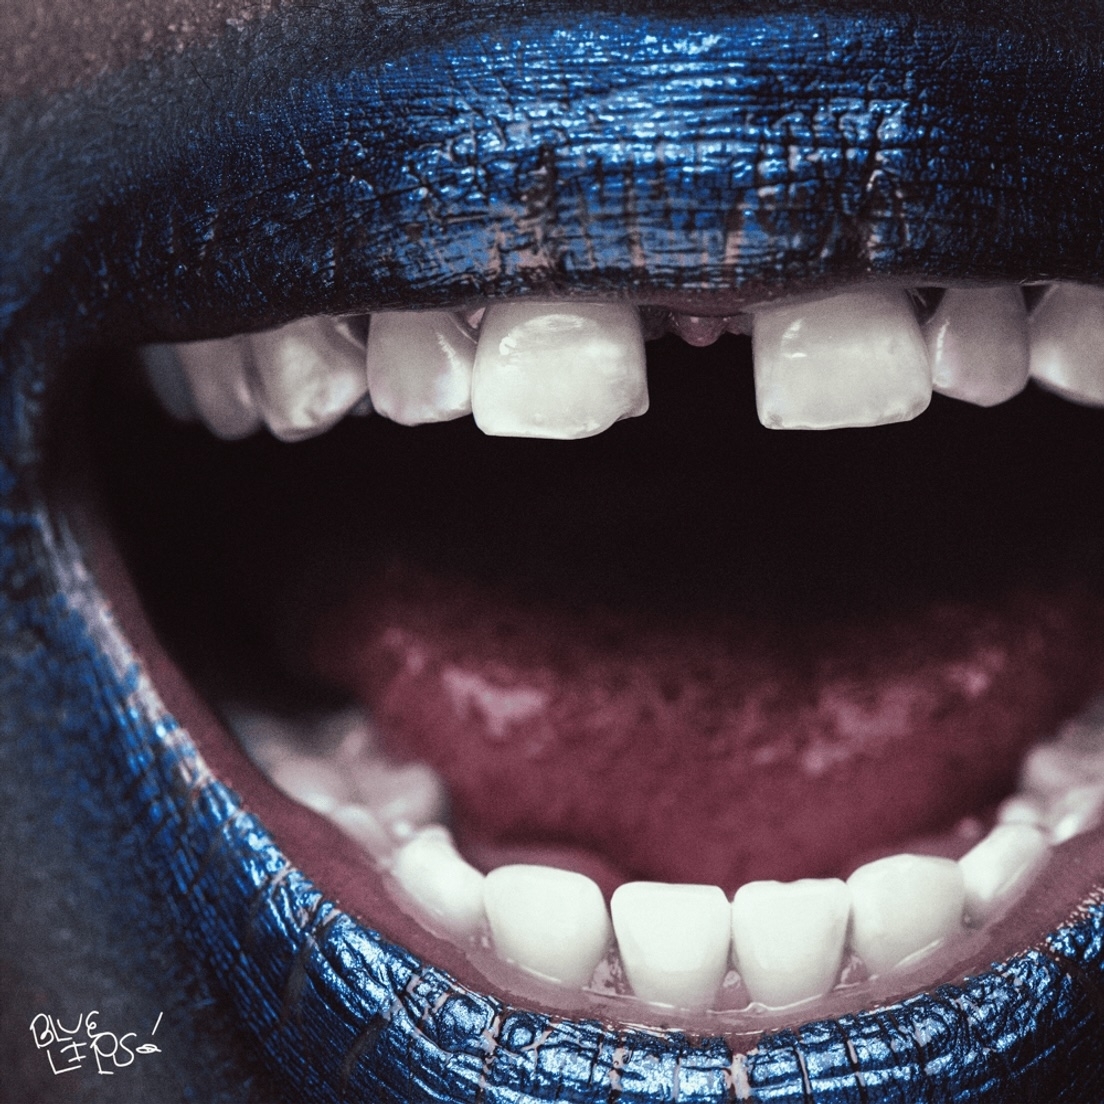 Close-up photo of an open mouth with metallic blue lipstick and a gap between the front teeth. The words &quot;BLUE LIPS!&quot; are handwritten in the corner